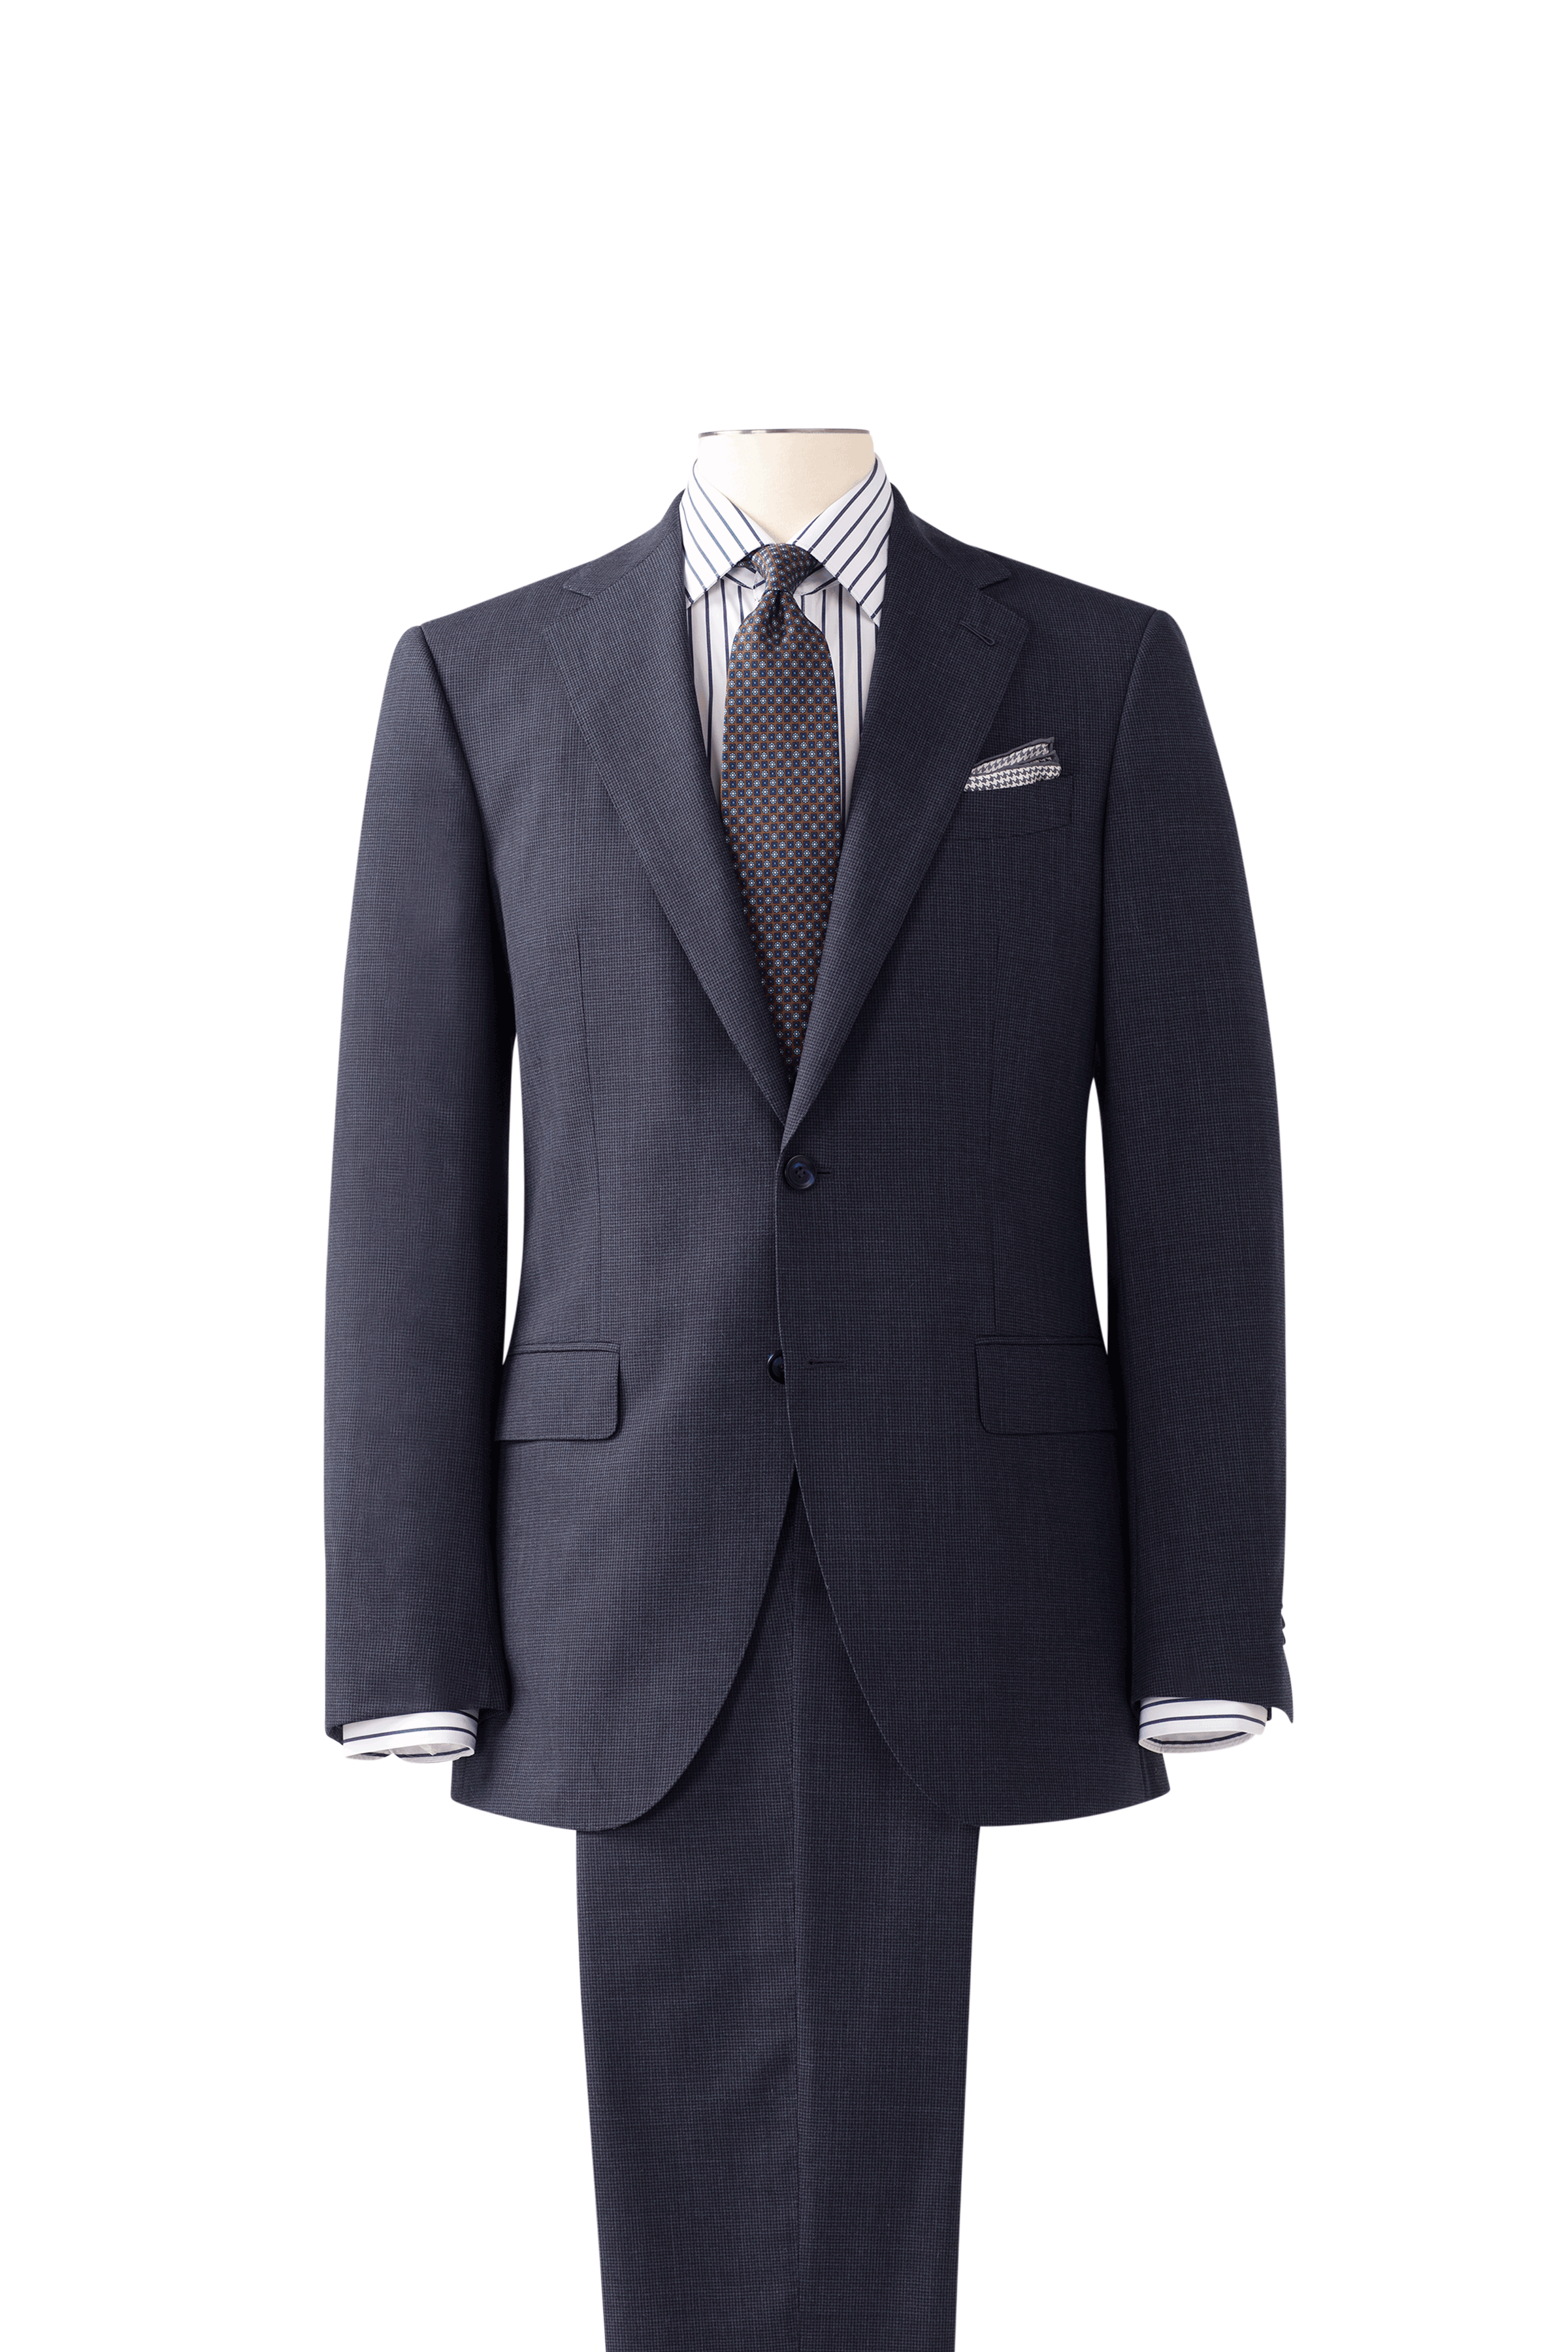 Dormeuil Navy Houndstooth Suit by Knot Standard